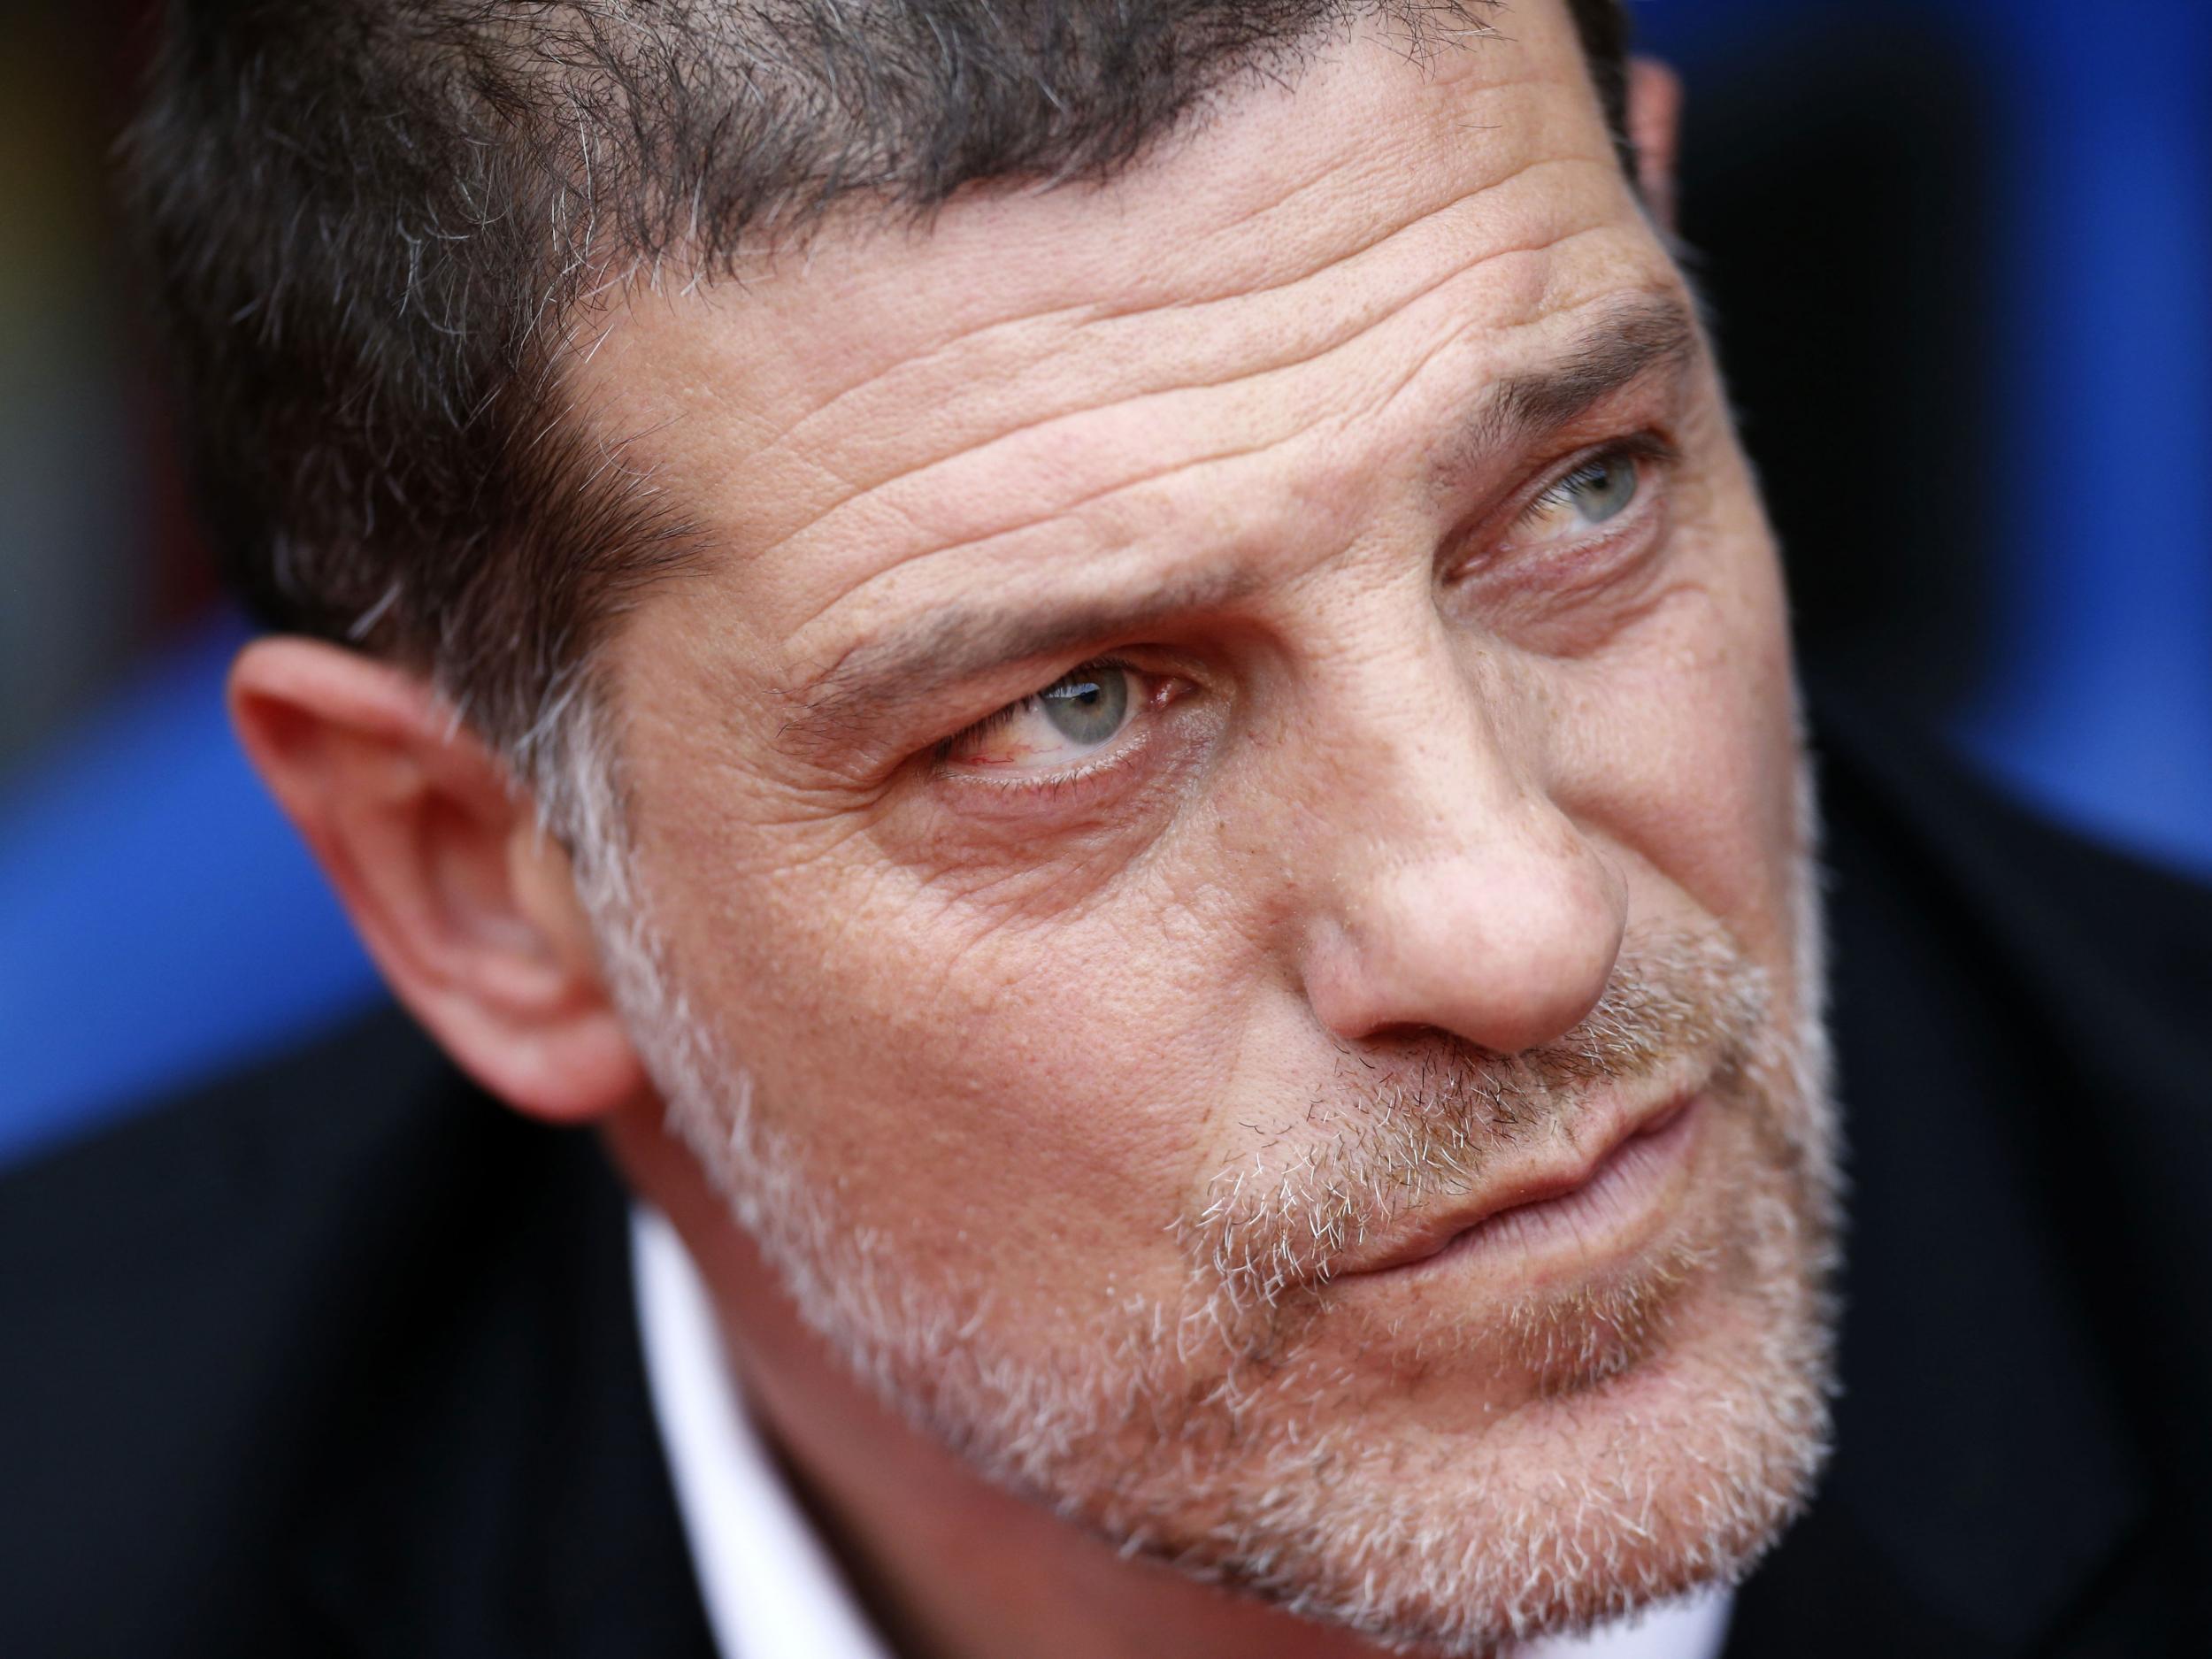 Slaven Bilic can have no complaints after being sacked by West Ham